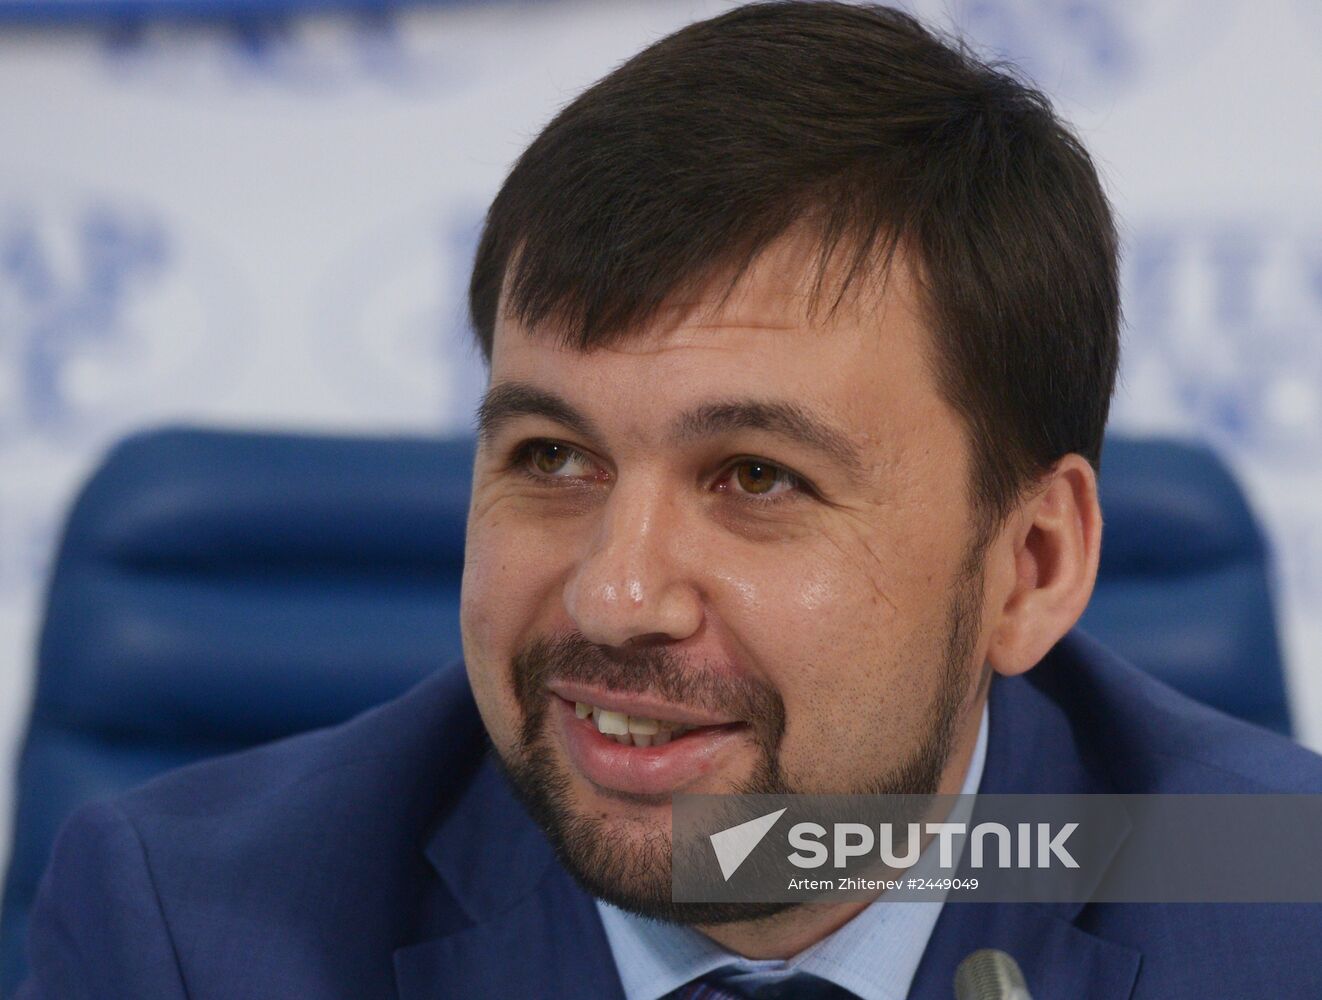 News conference on priority measures by Donetsk People's Republic